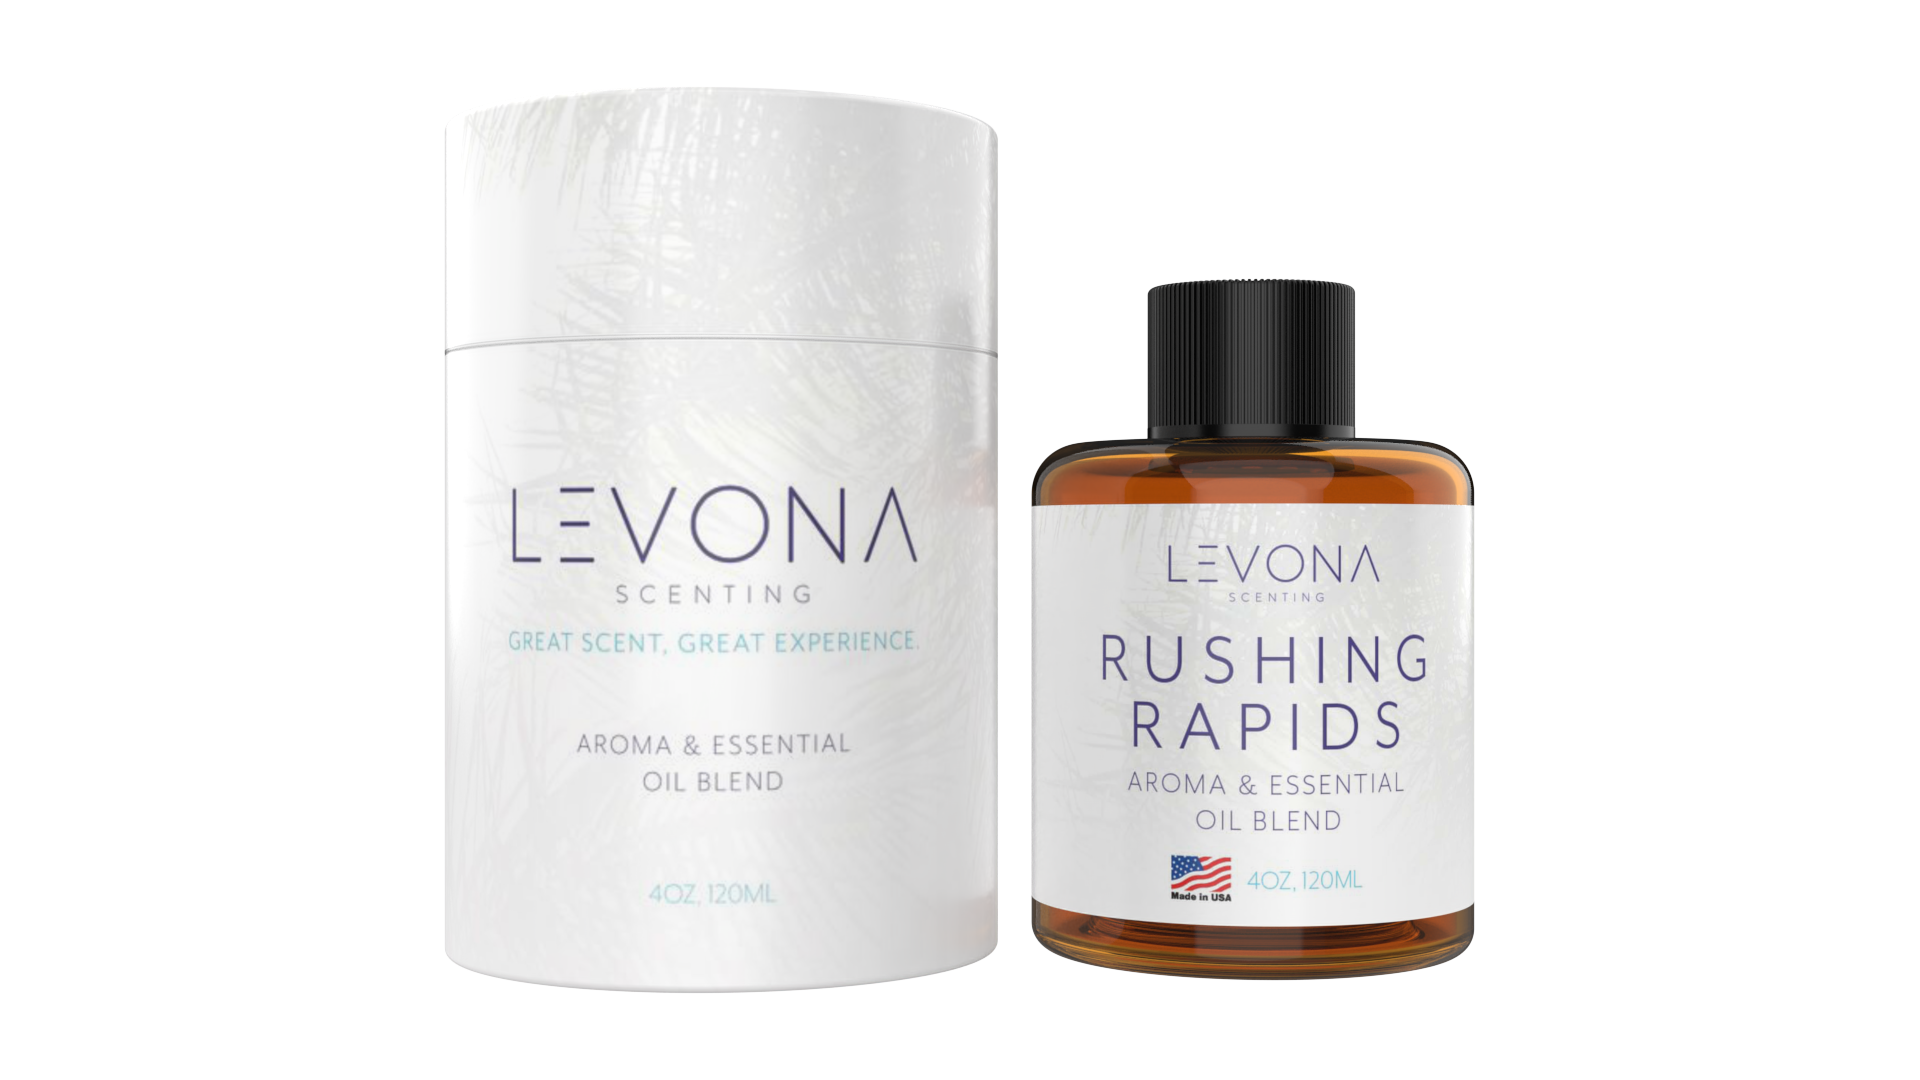 Levona Scent Essential Oils For Diffusers For Home: Hotel and Home